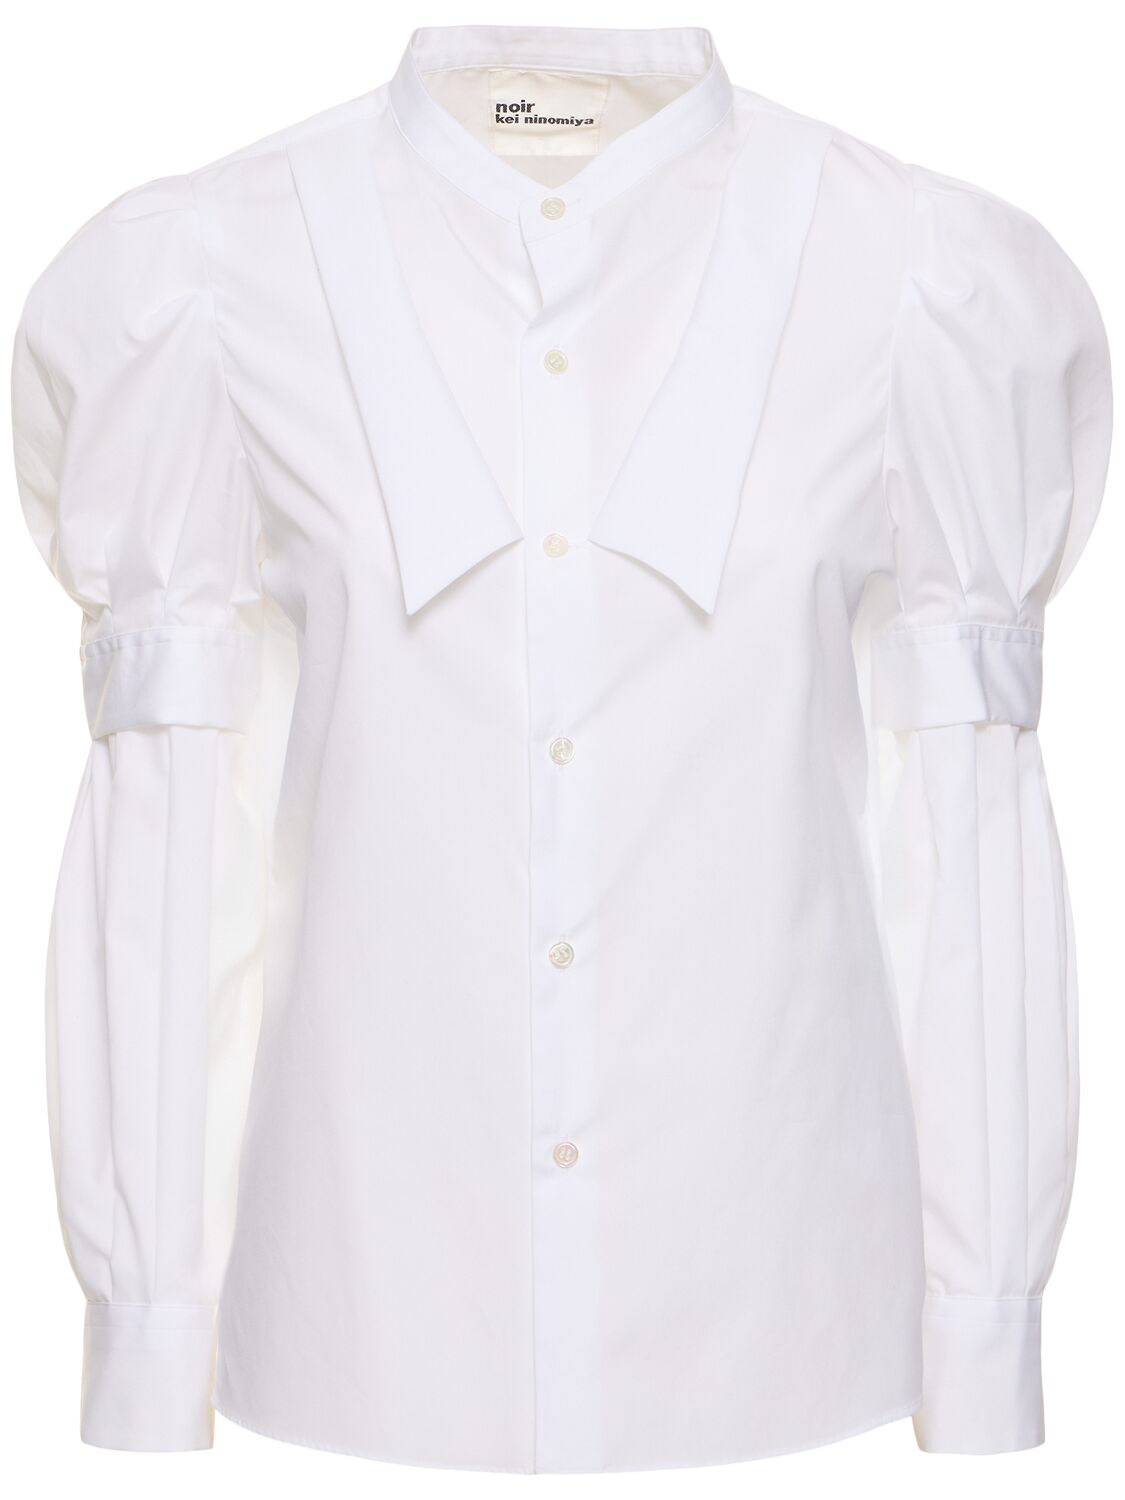 Image of Broad Double Collar Cotton Shirt